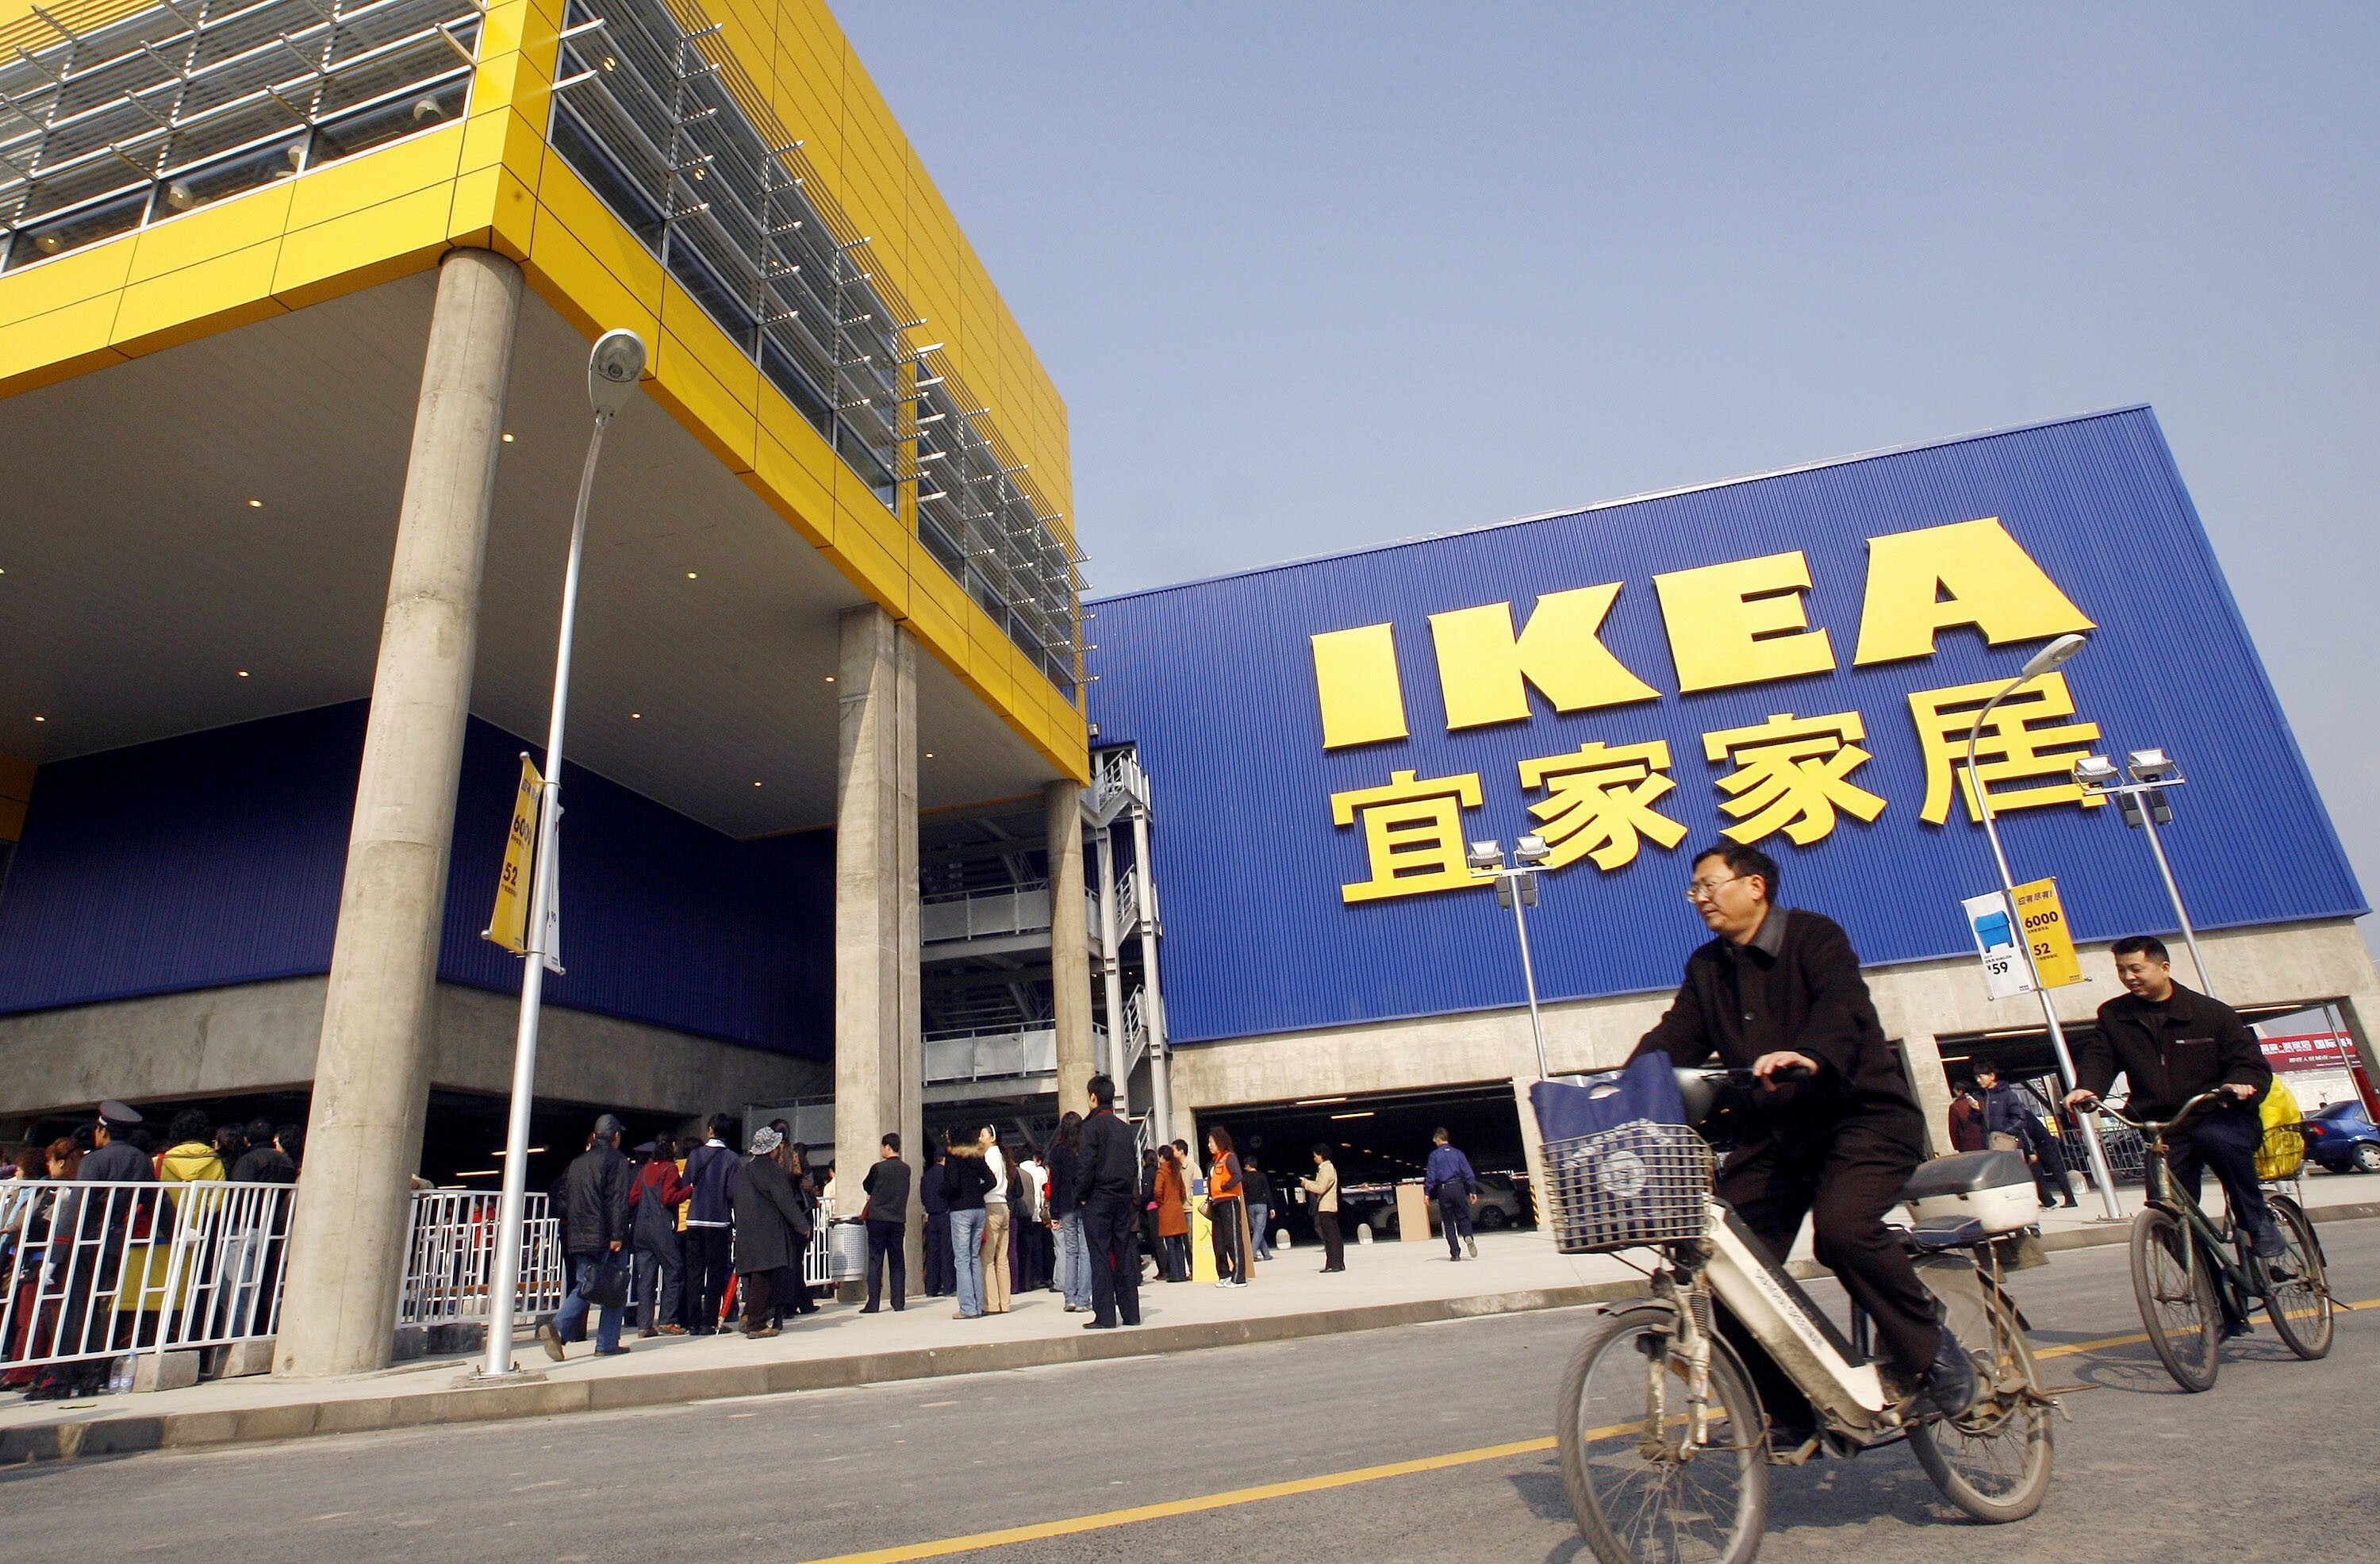 Customers cycle past a newly-opened Ikea store in Chengdu, China, on November 29, 2006. Photo: AFP